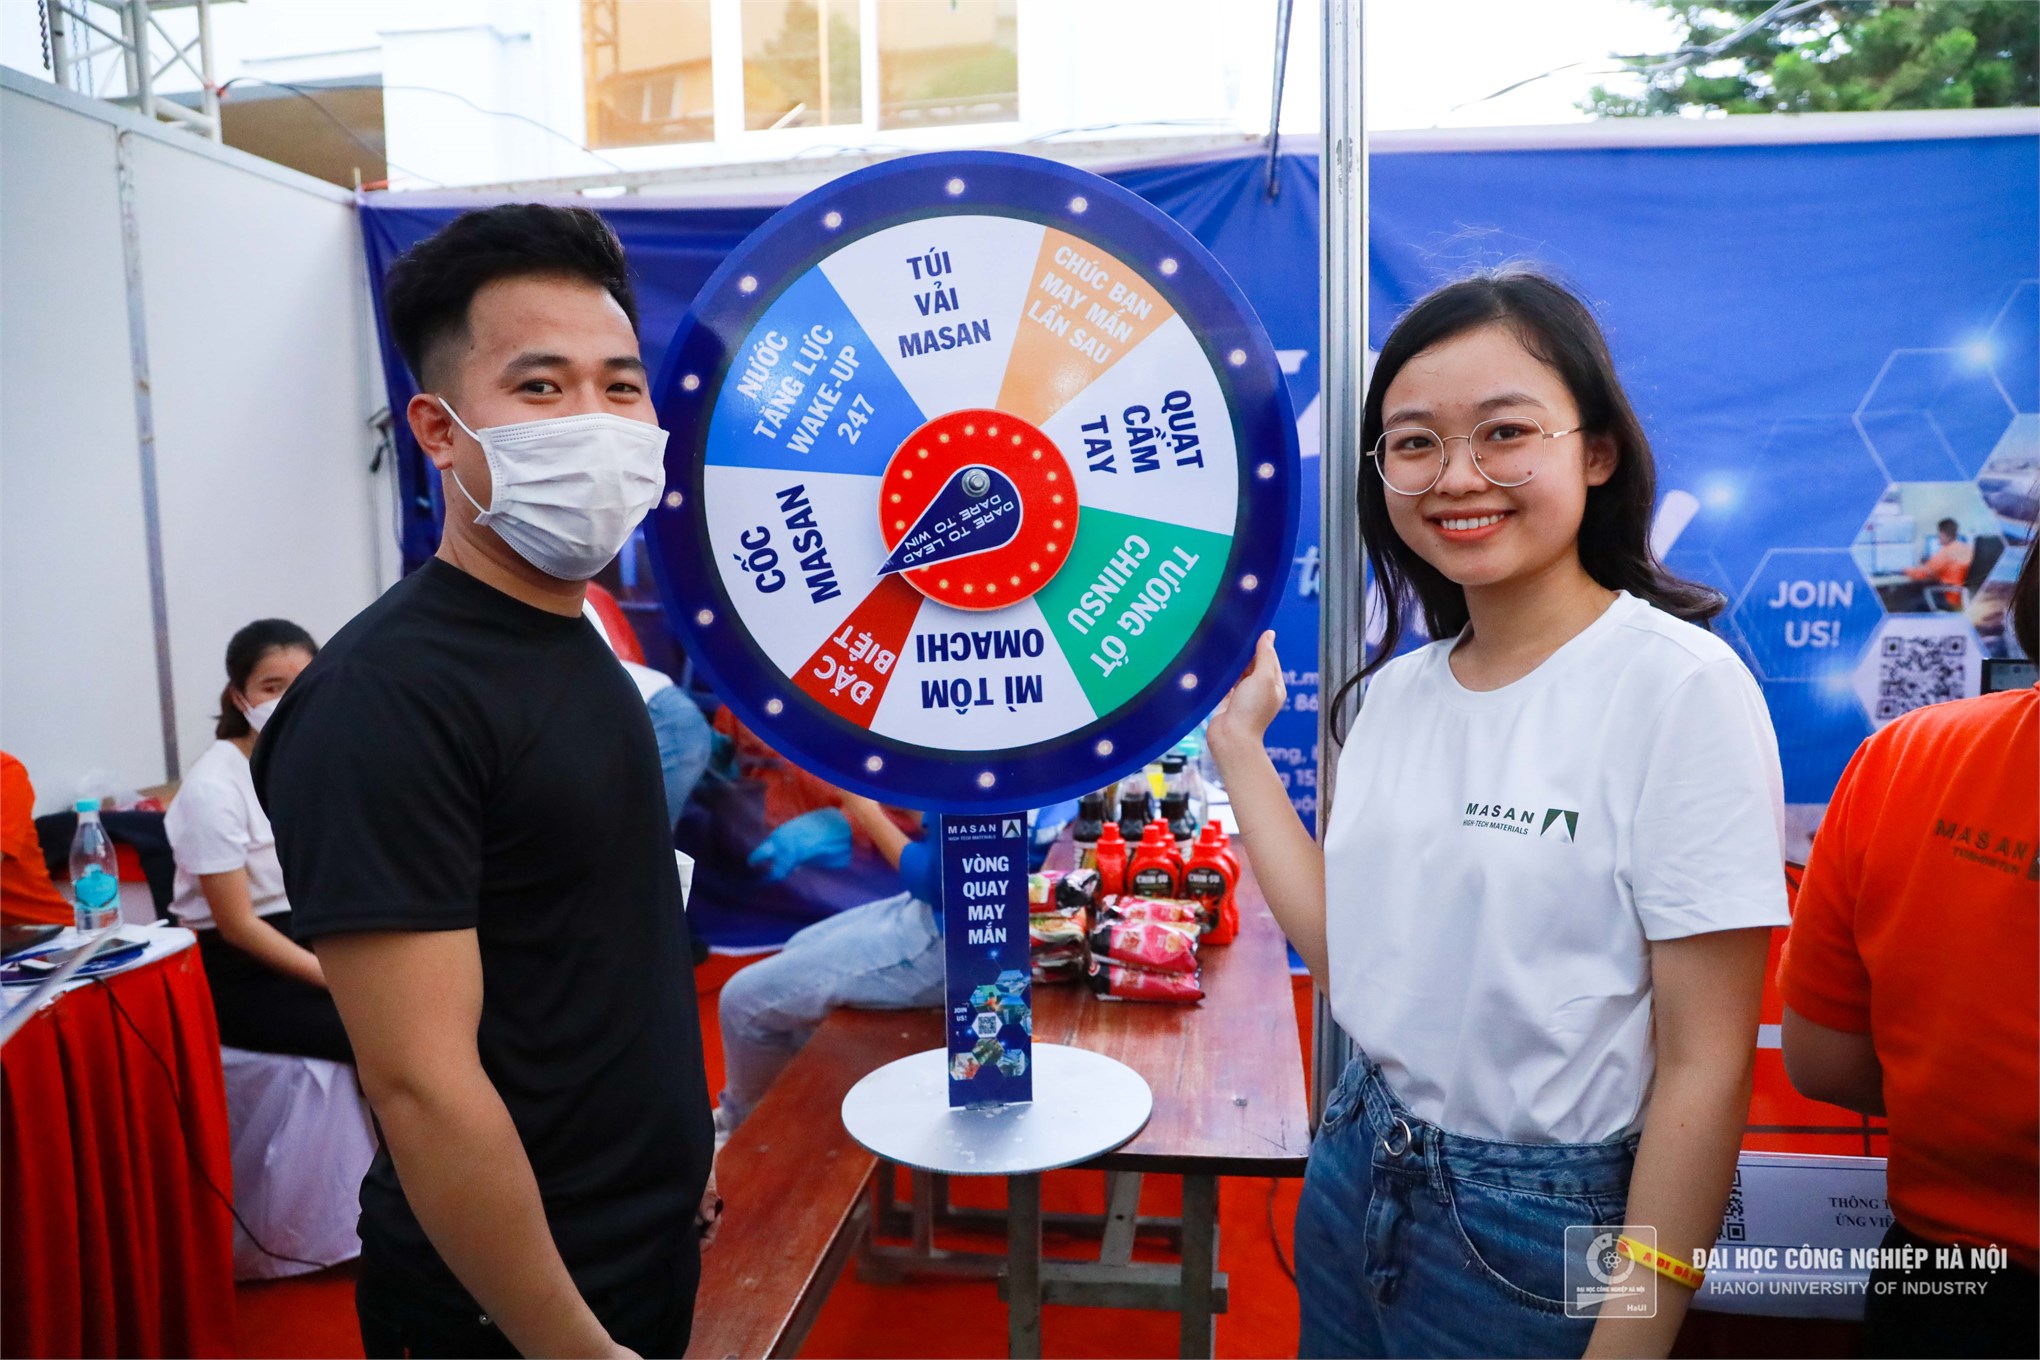 8,500 job opportunities for students of Hanoi University of Industry at the Job Fair 2022